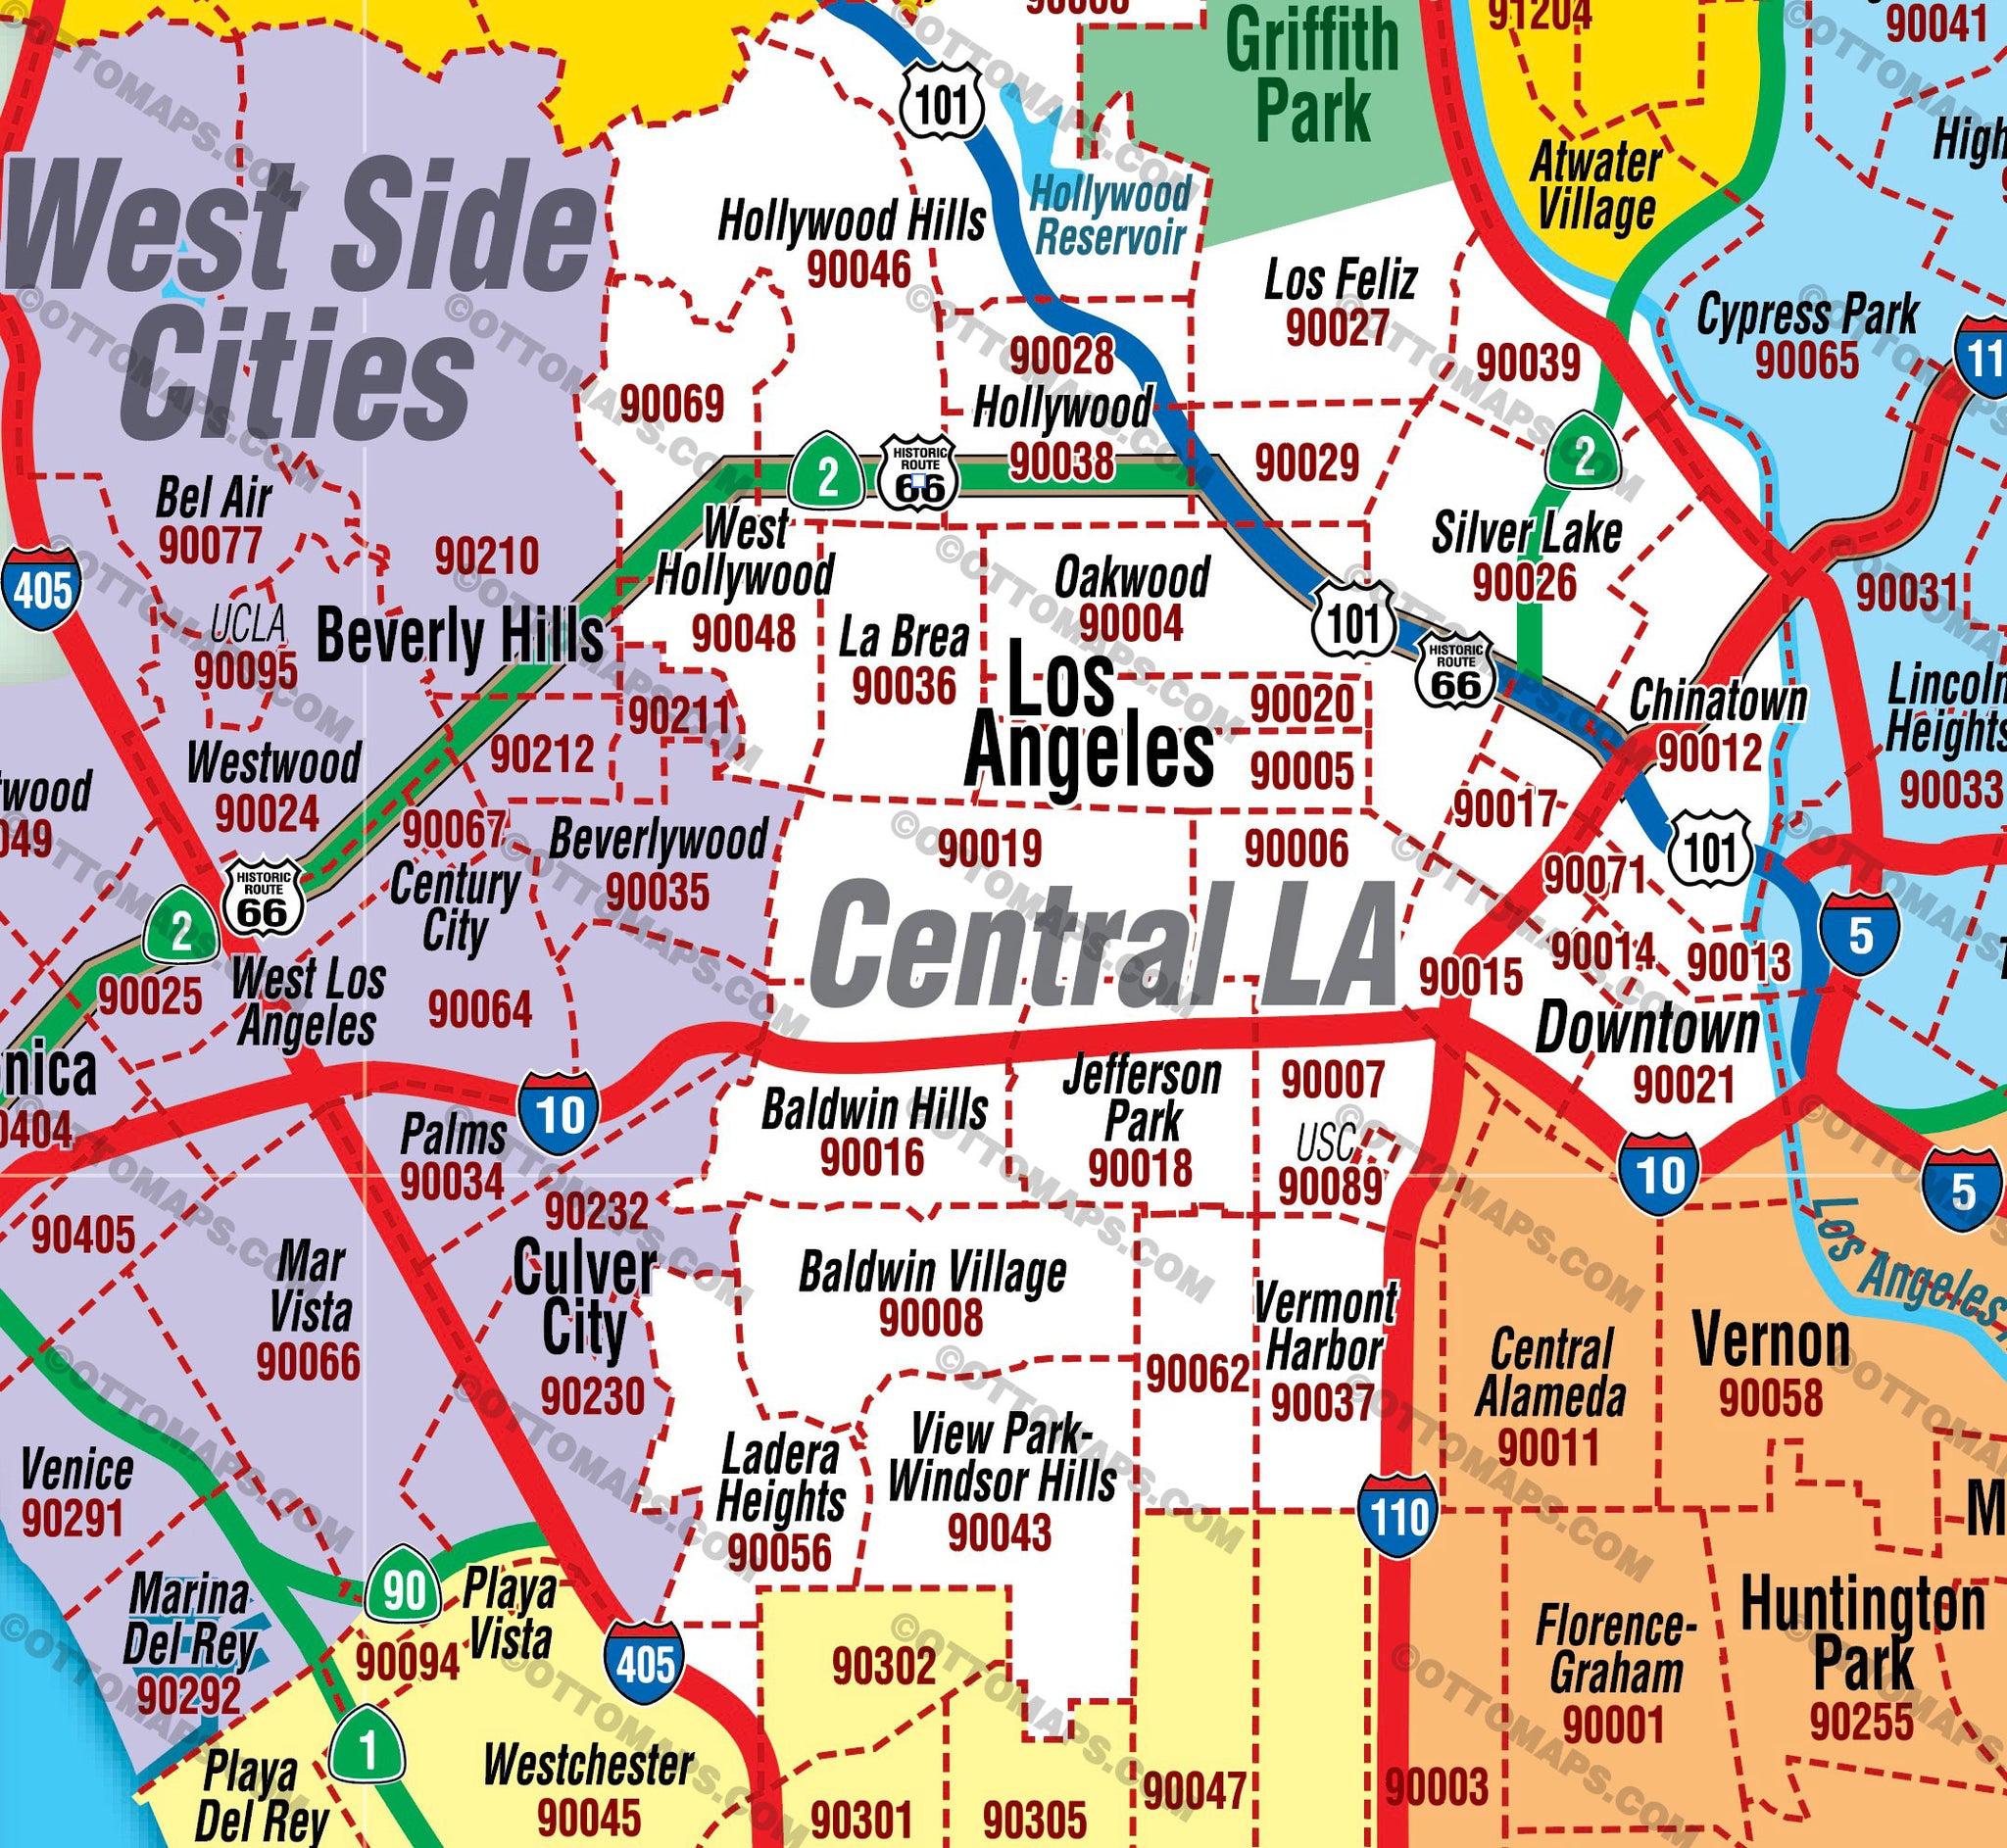 Los Angeles Zip Code Map Los Angeles Zip Code Map   FULL (County Areas colorized) – Otto Maps